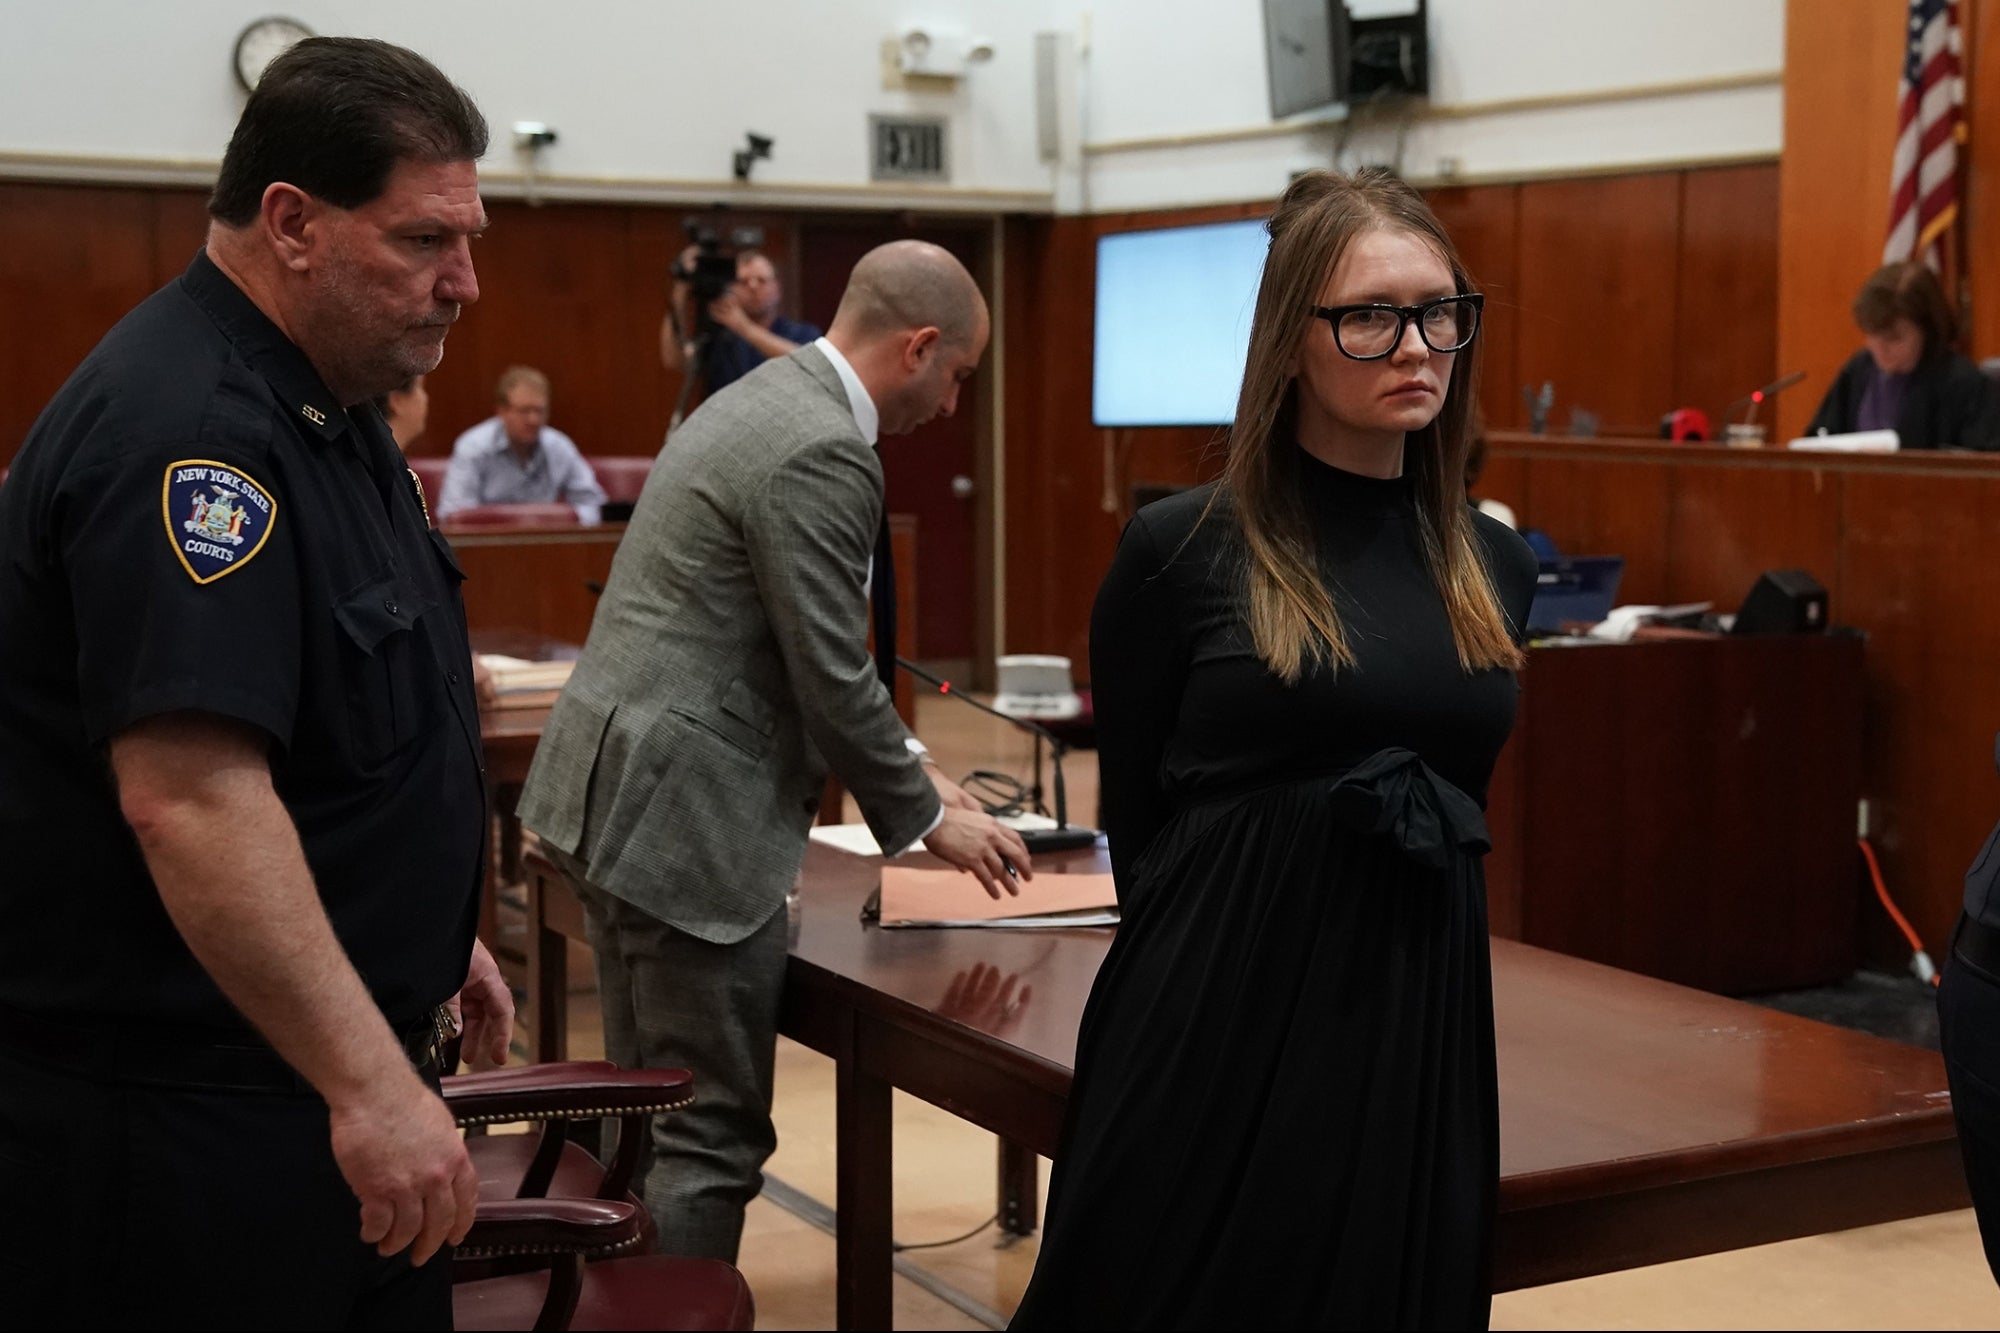 False heiress Anna Sorokin, whose case inspired a hit series on Netflix, will be deported to Germany